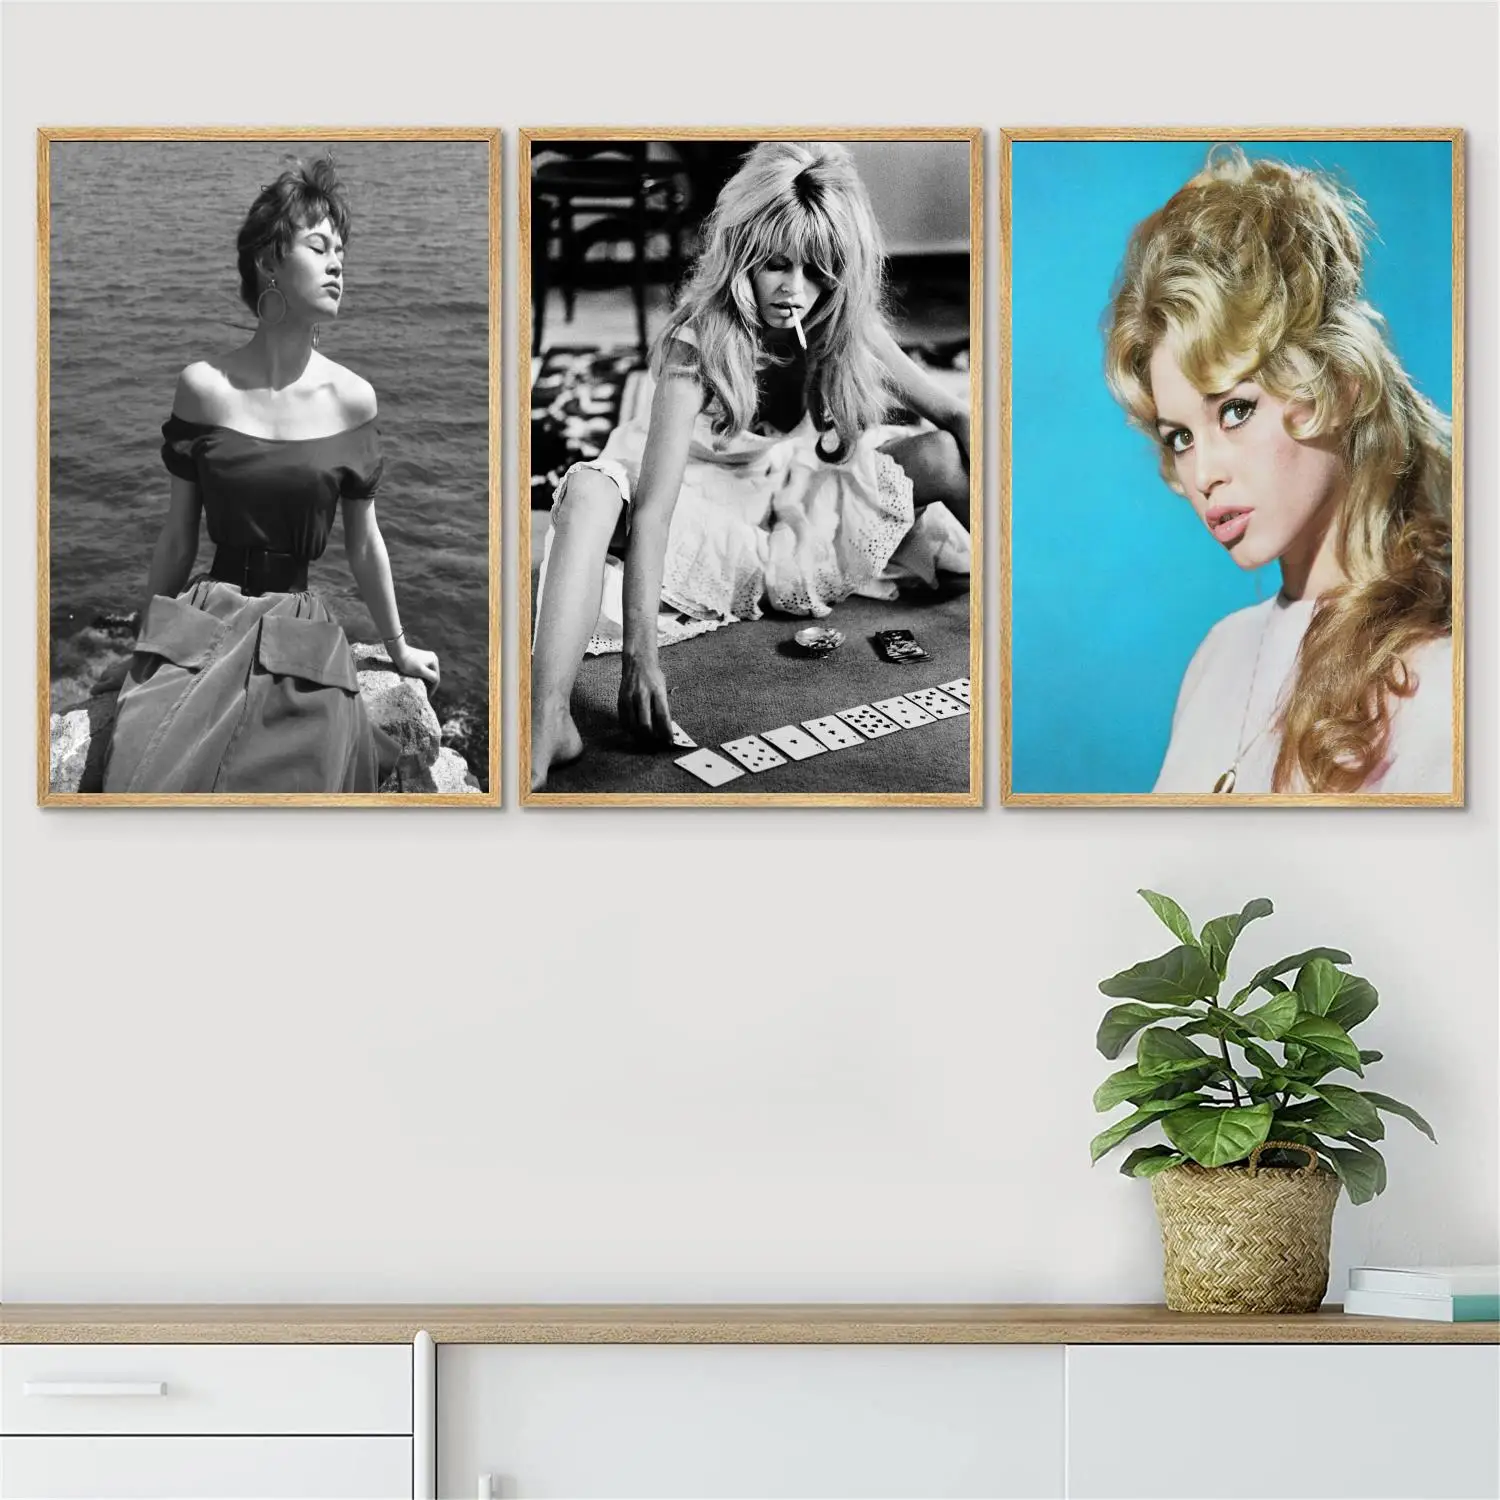 

brigitte bardot model poster Wall Art Canvas Posters Decoration Art Poster Personalized Gift Modern Family bedroom Painting